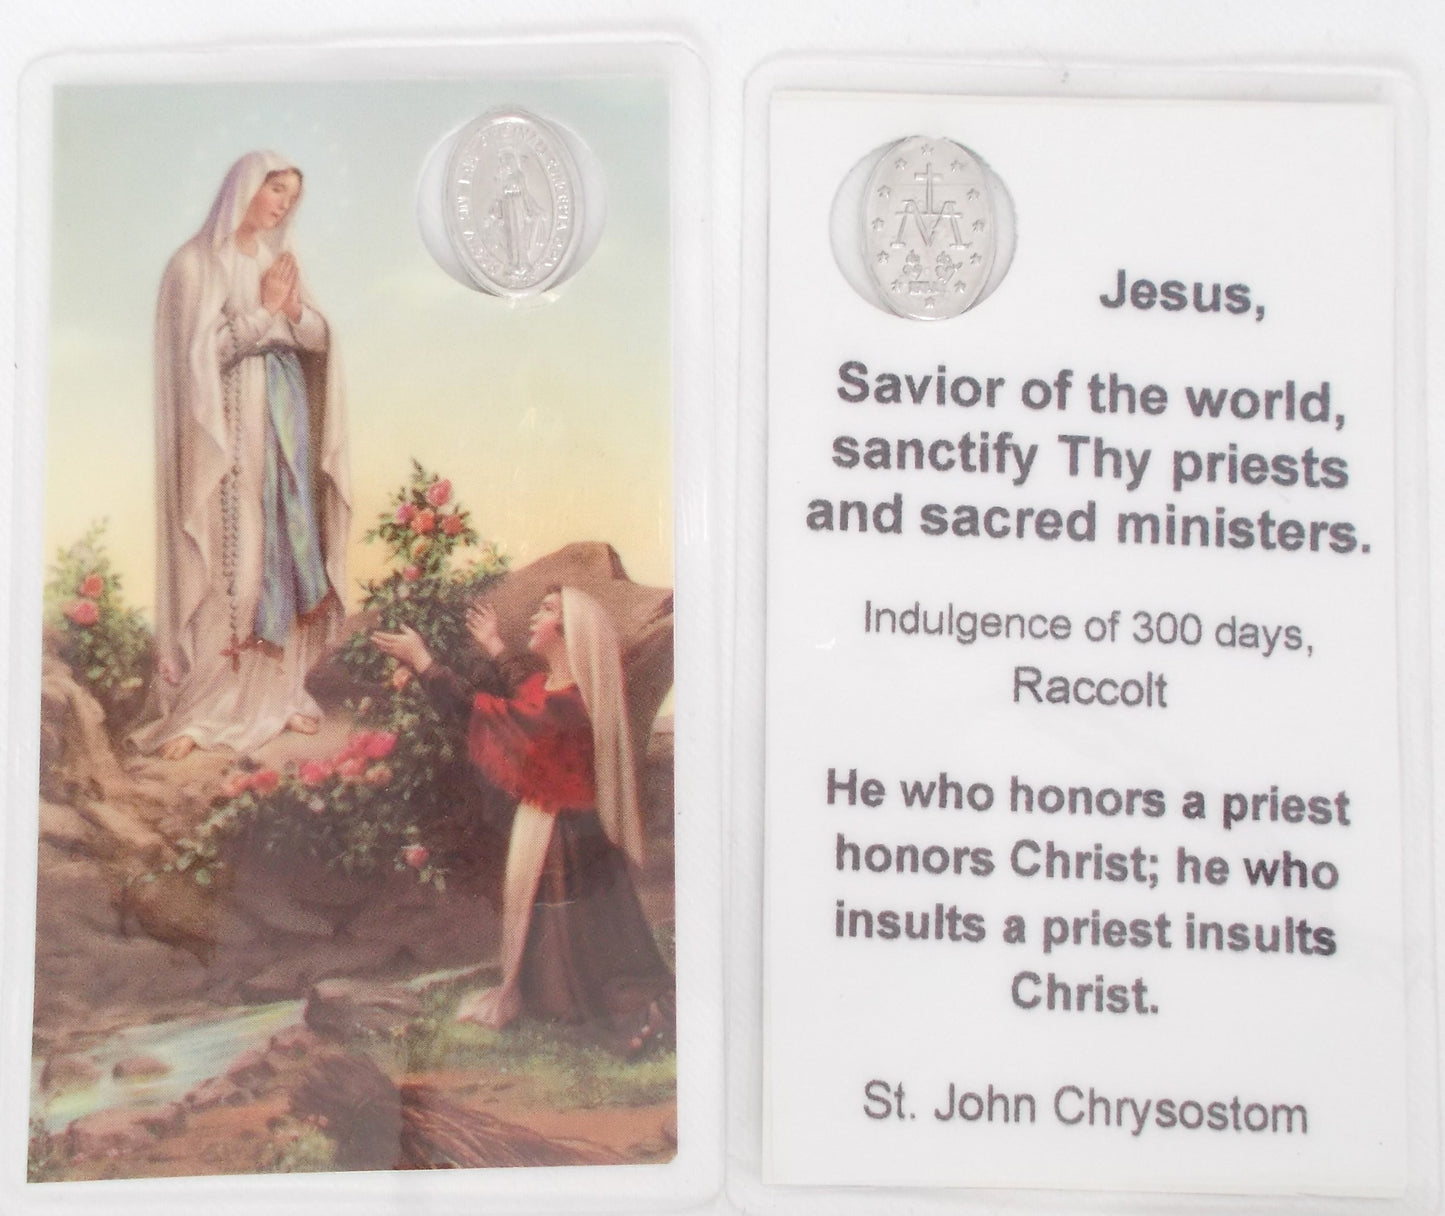 Laminated with Miraculous Medal - Our Lady of Lourdes - Sanctify Thy priests